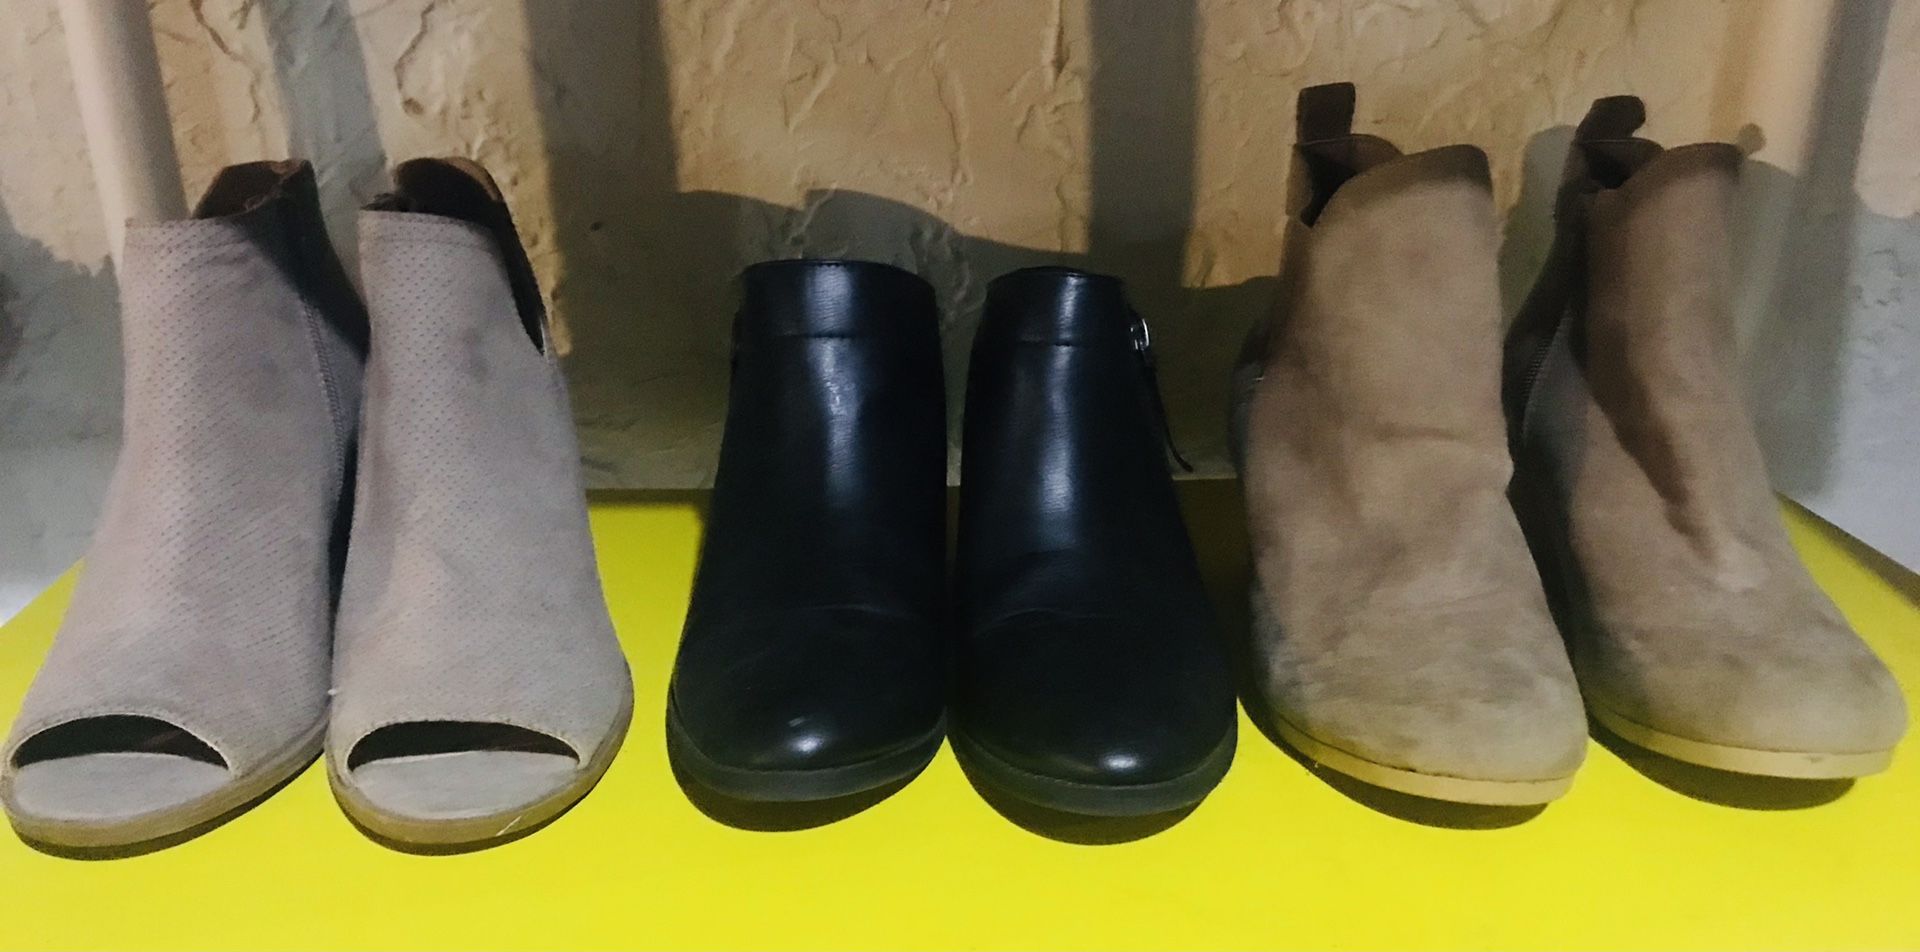 3 Pairs Of Small Heeled Boots